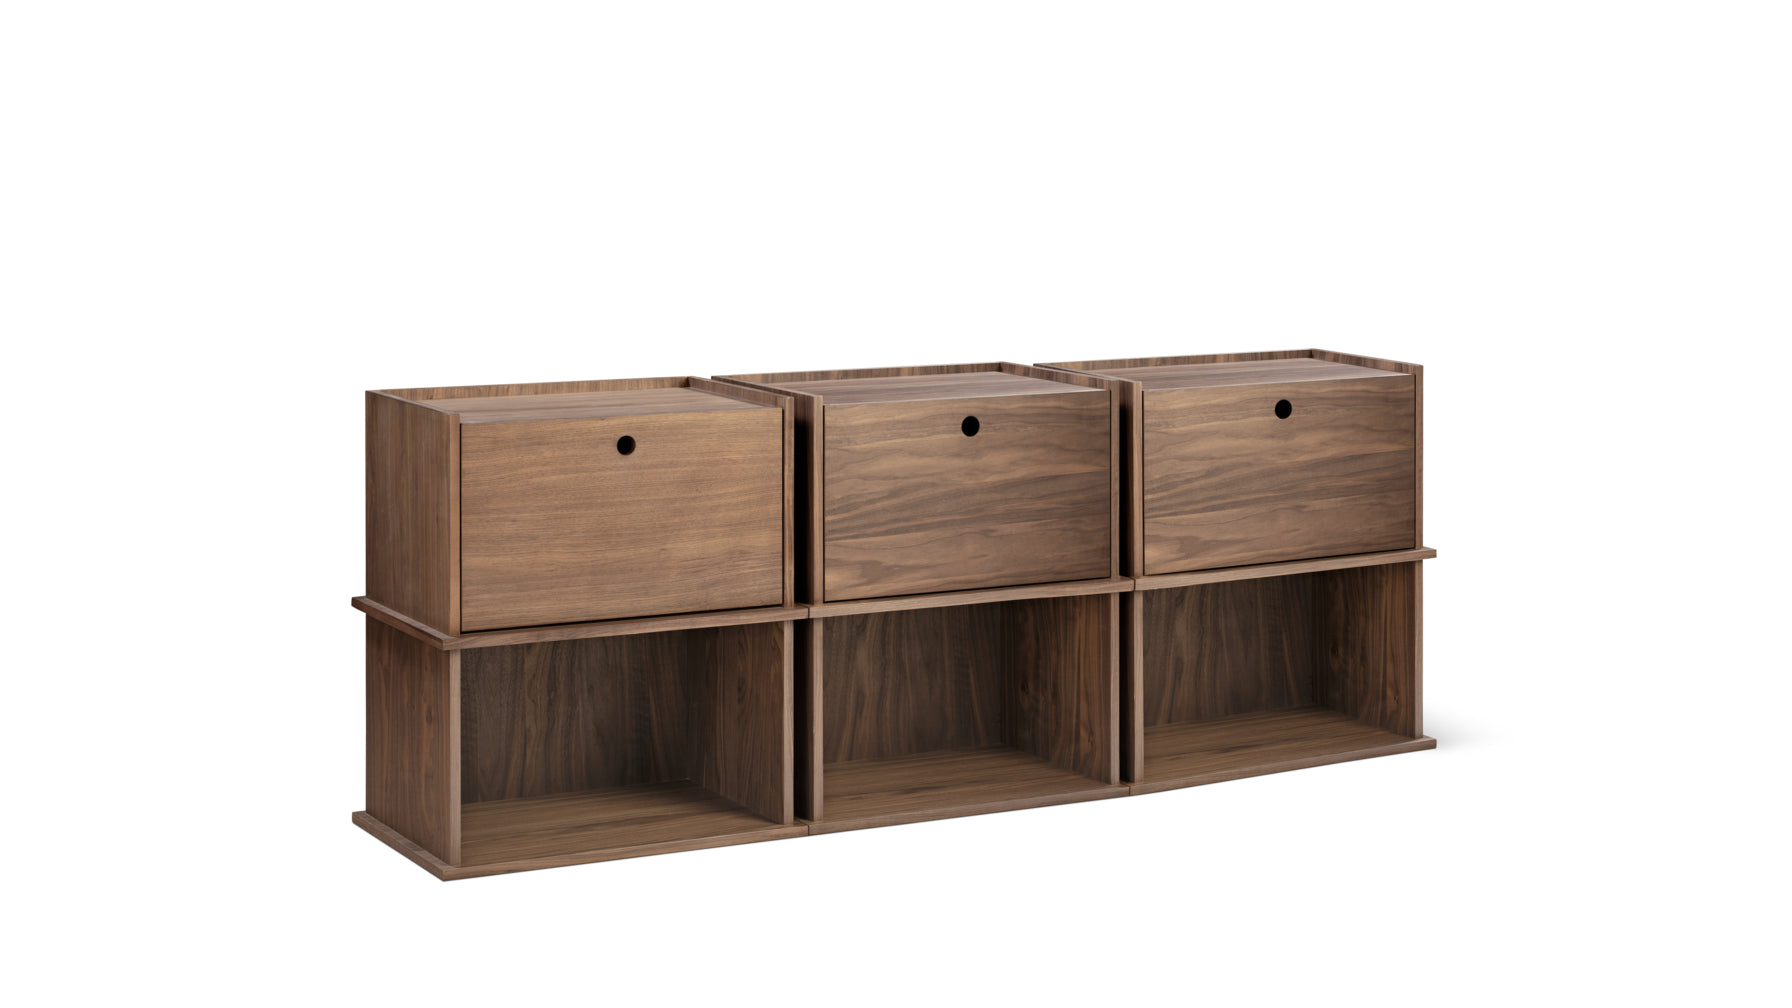 Keep Stacking Storage System 6-Piece, Open and Closed, Walnut - Image 1